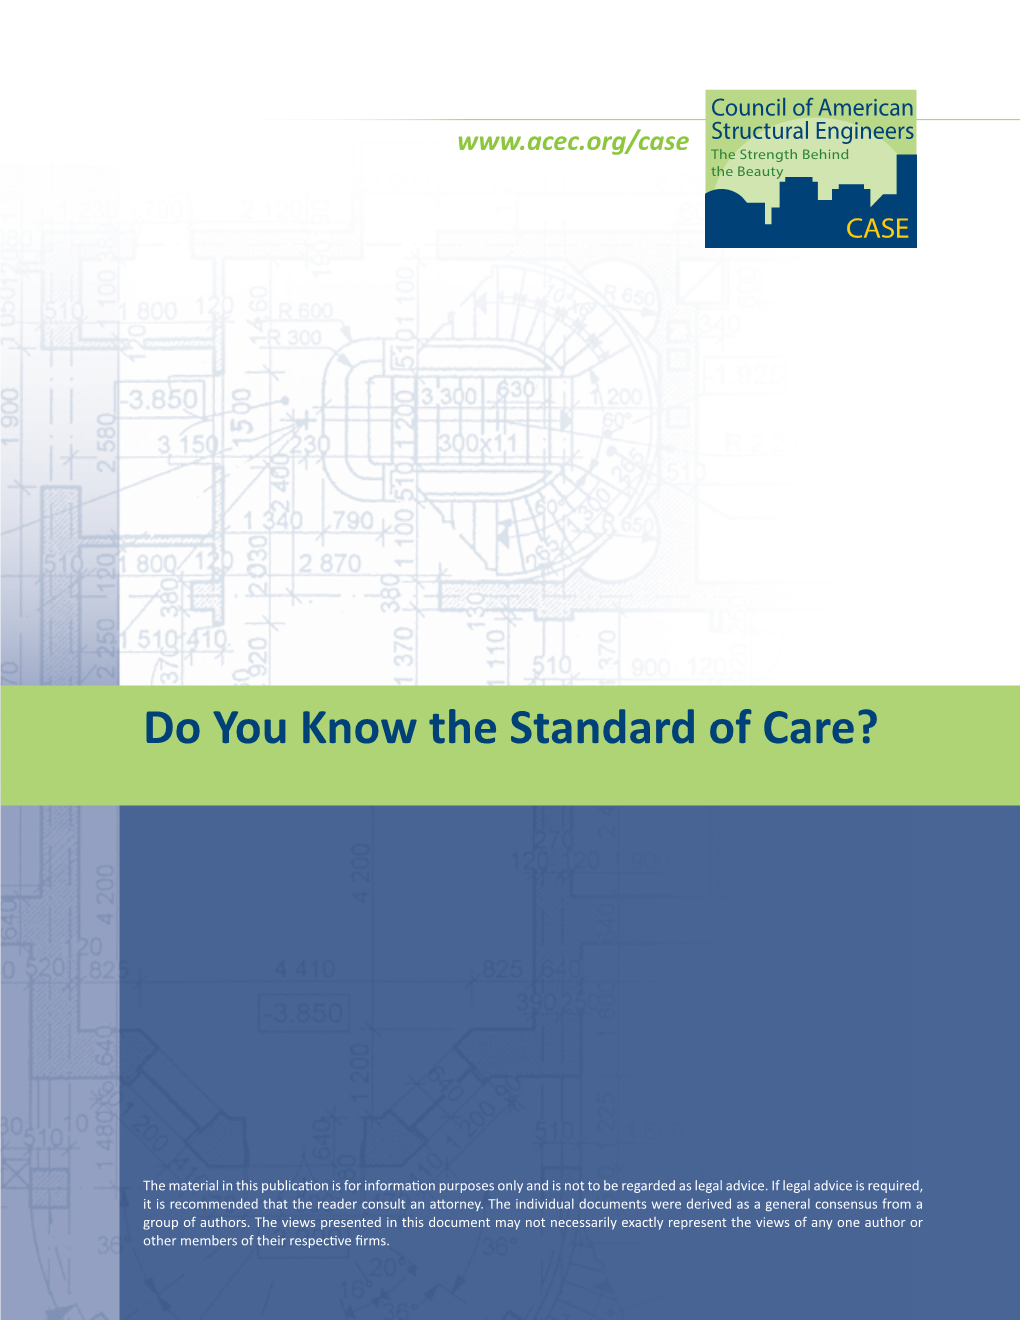 ACEC: Do You Know the Standard of Care?